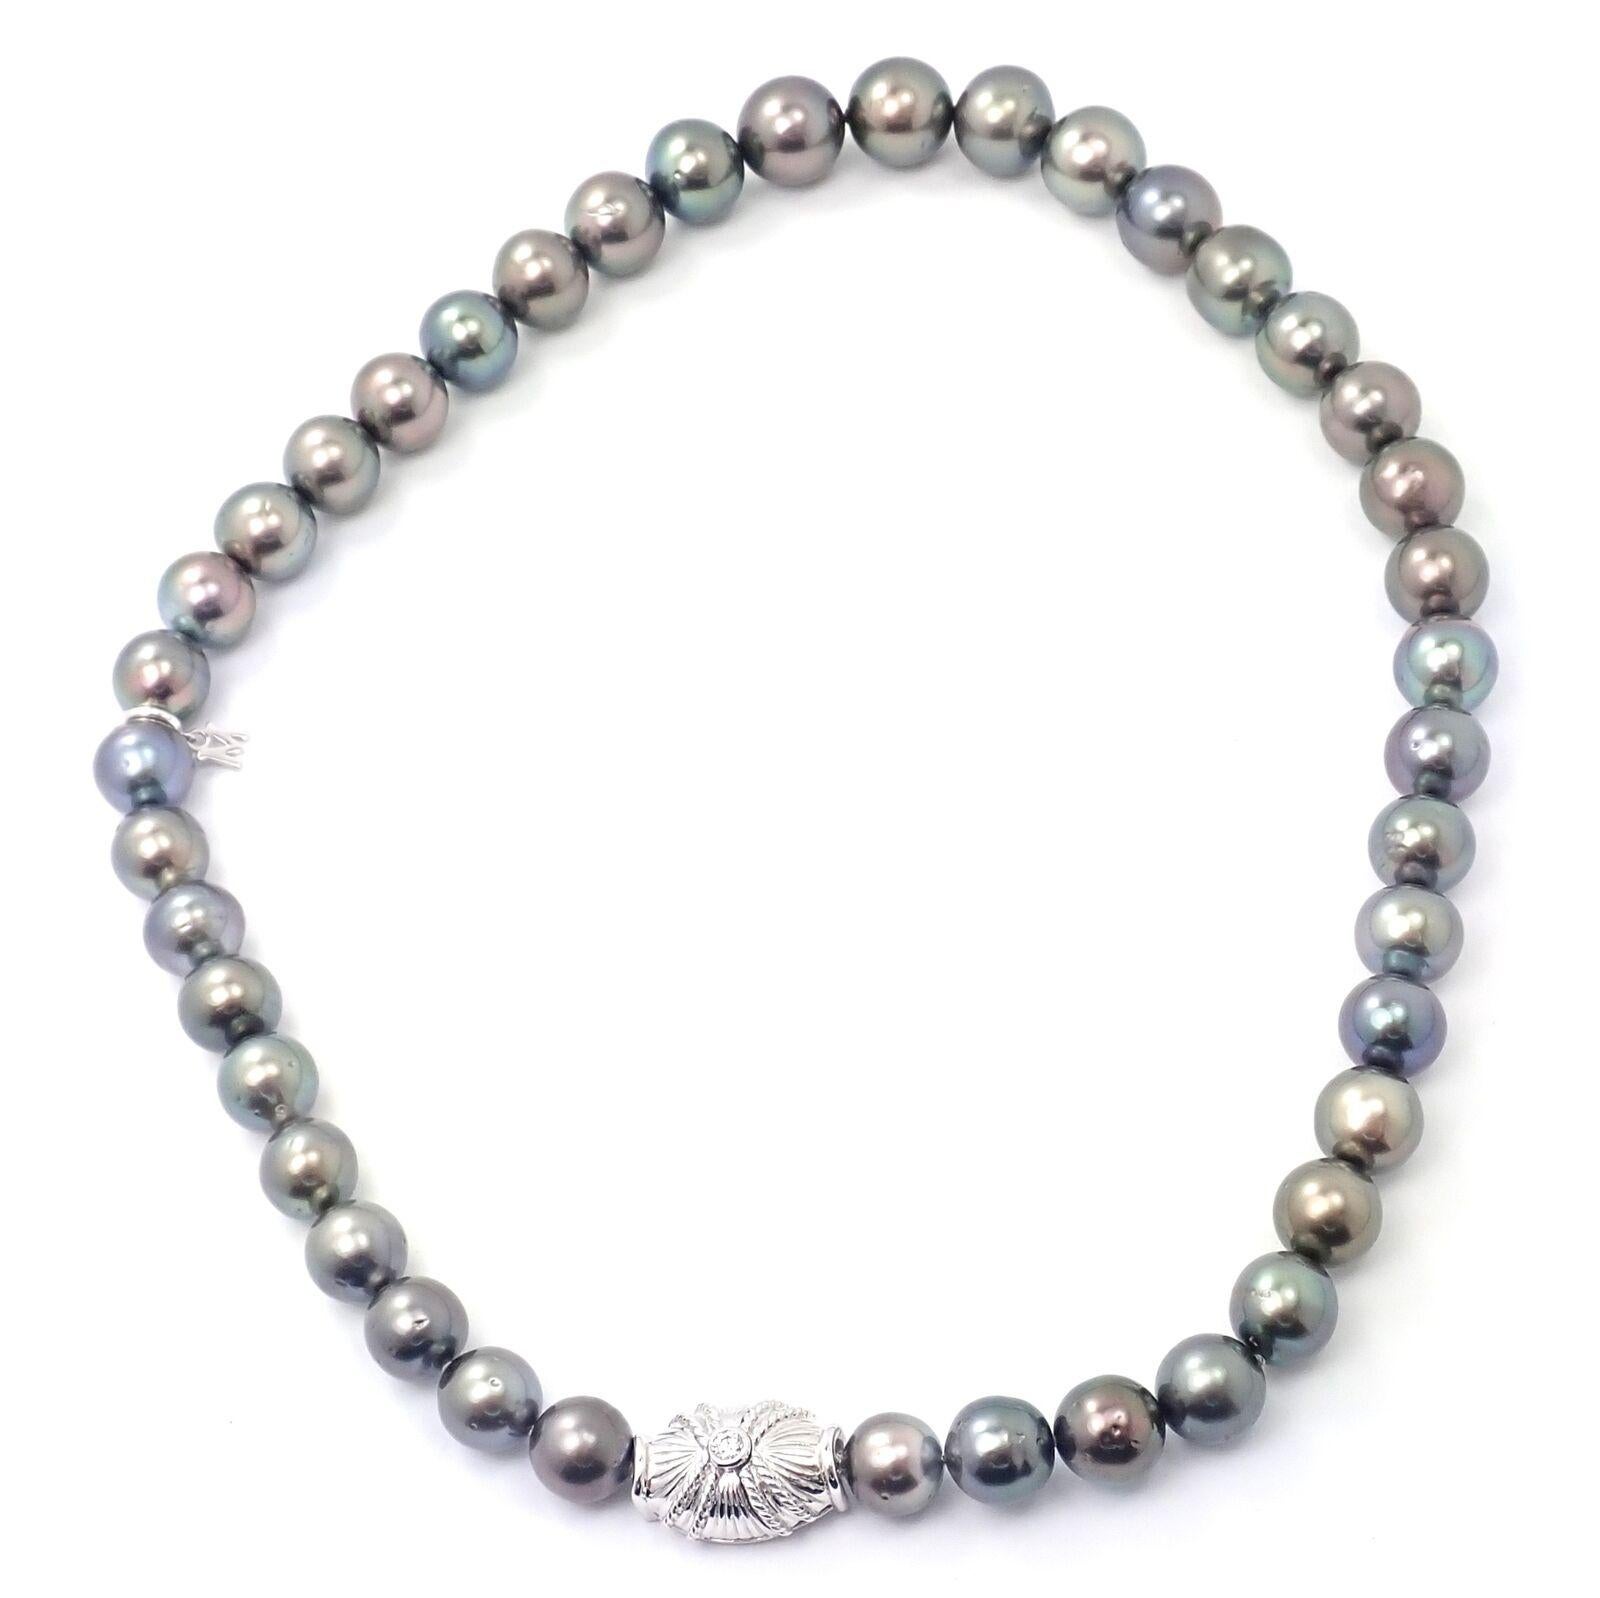 18k White Gold Diamond Large Tahitian Black South Sea Pearl Strand Necklace by Mikimoto. 
With 41 x 13mm - 10mm Tahitian South Sea Black Pearls
1 Round brilliant cut diamond VS1 clarity, G color total weight .10ct
Details:
Necklace length: